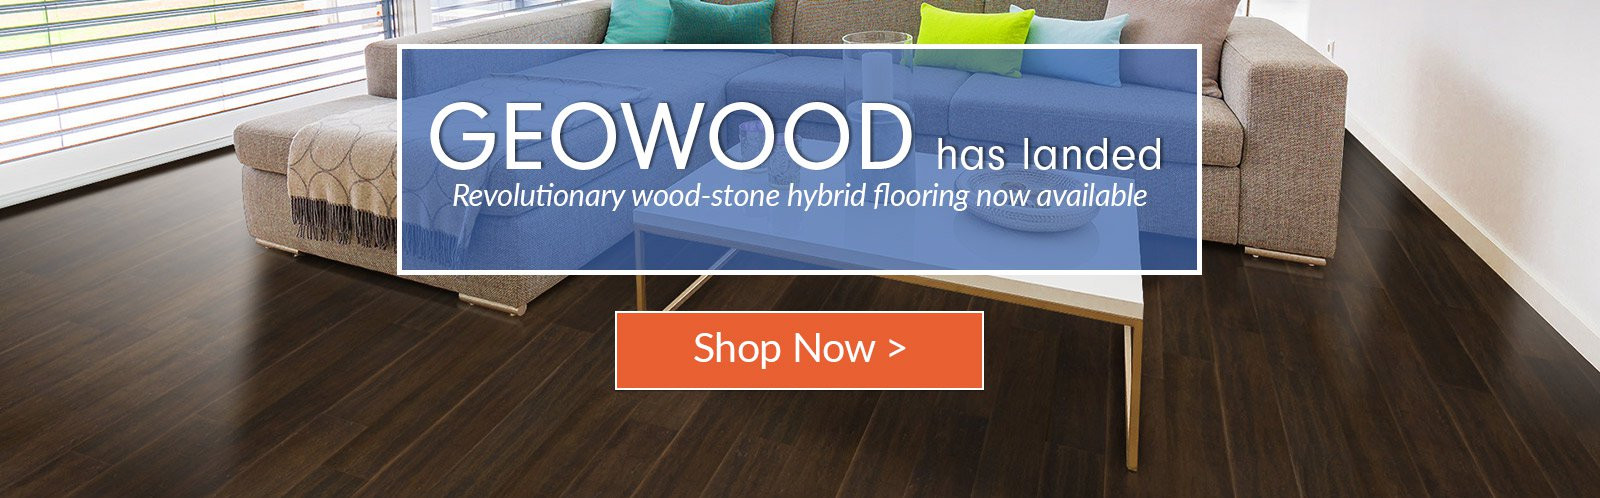 23 Famous Hardwood Flooring Floor and Decor 2024 free download hardwood flooring floor and decor of green building construction materials and home decor cali bamboo intended for geowood launch homepage slider